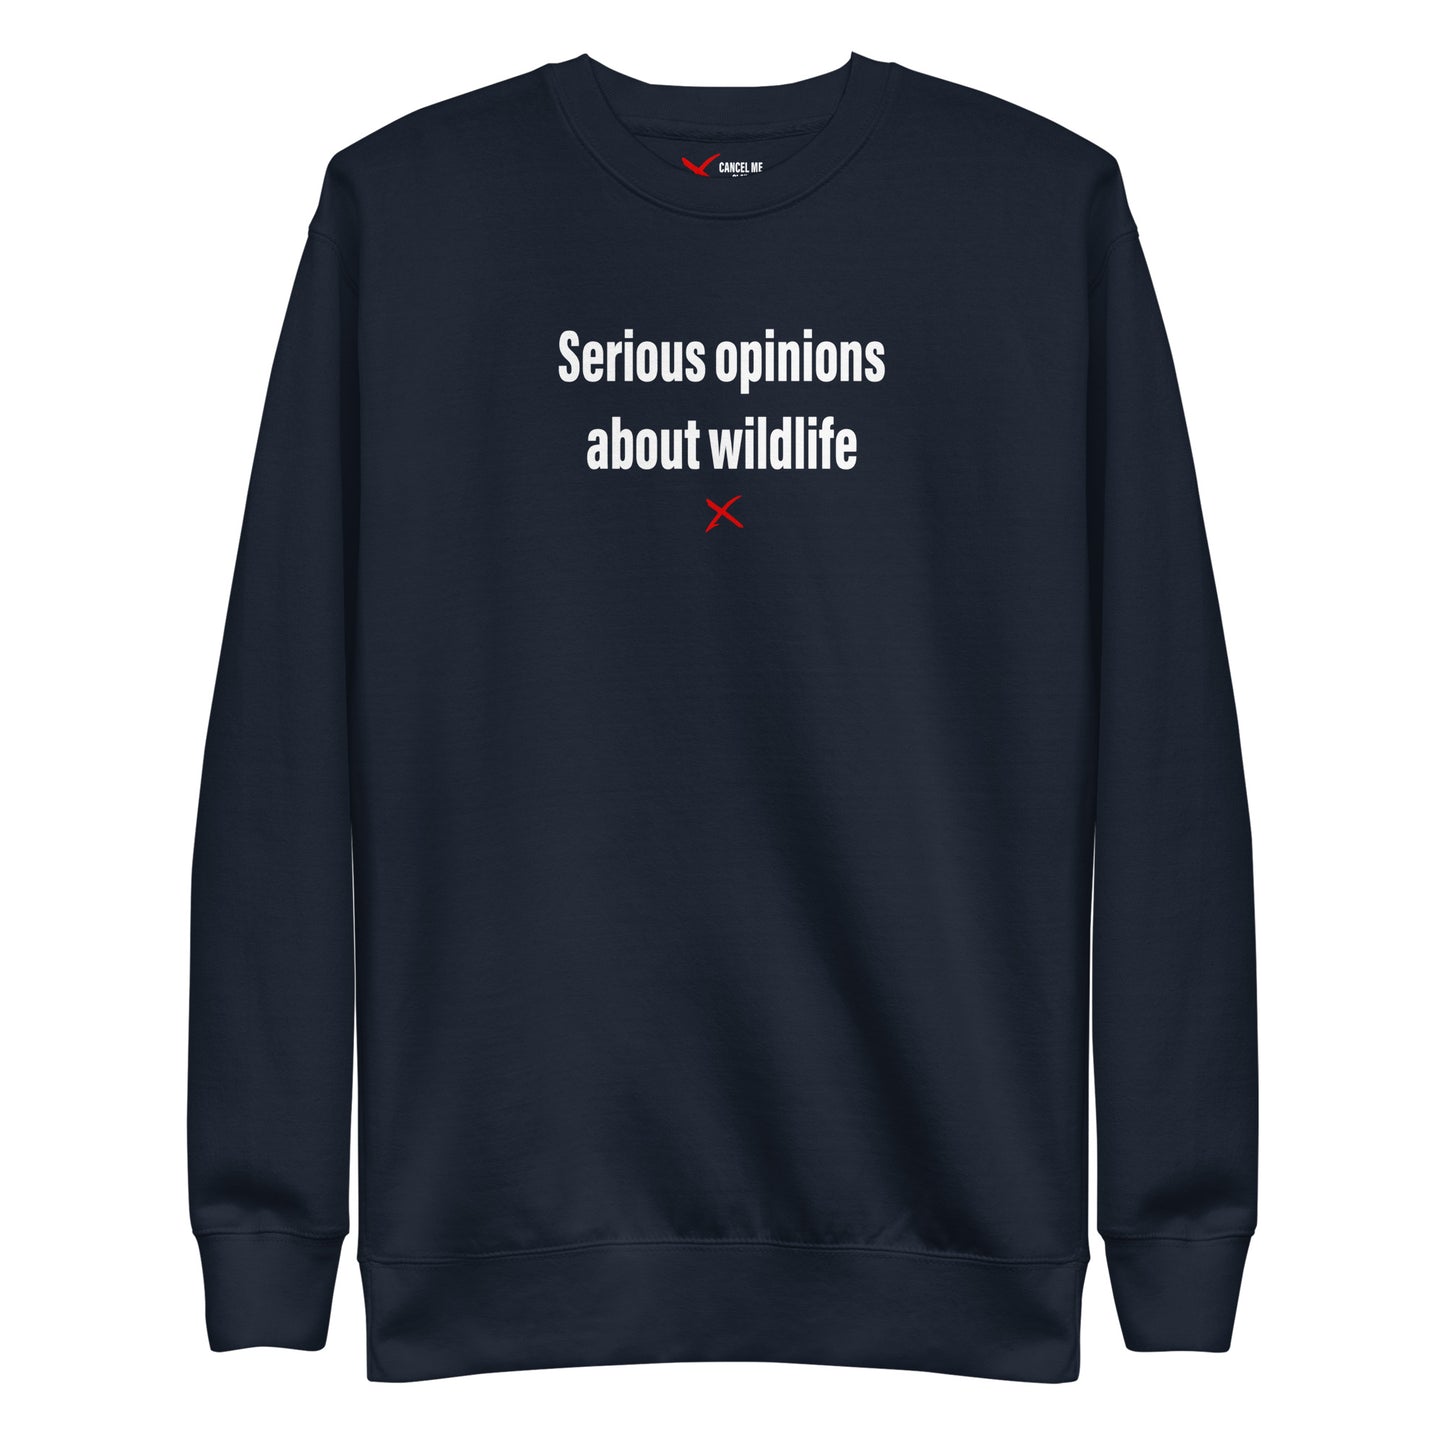 Serious opinions about wildlife - Sweatshirt